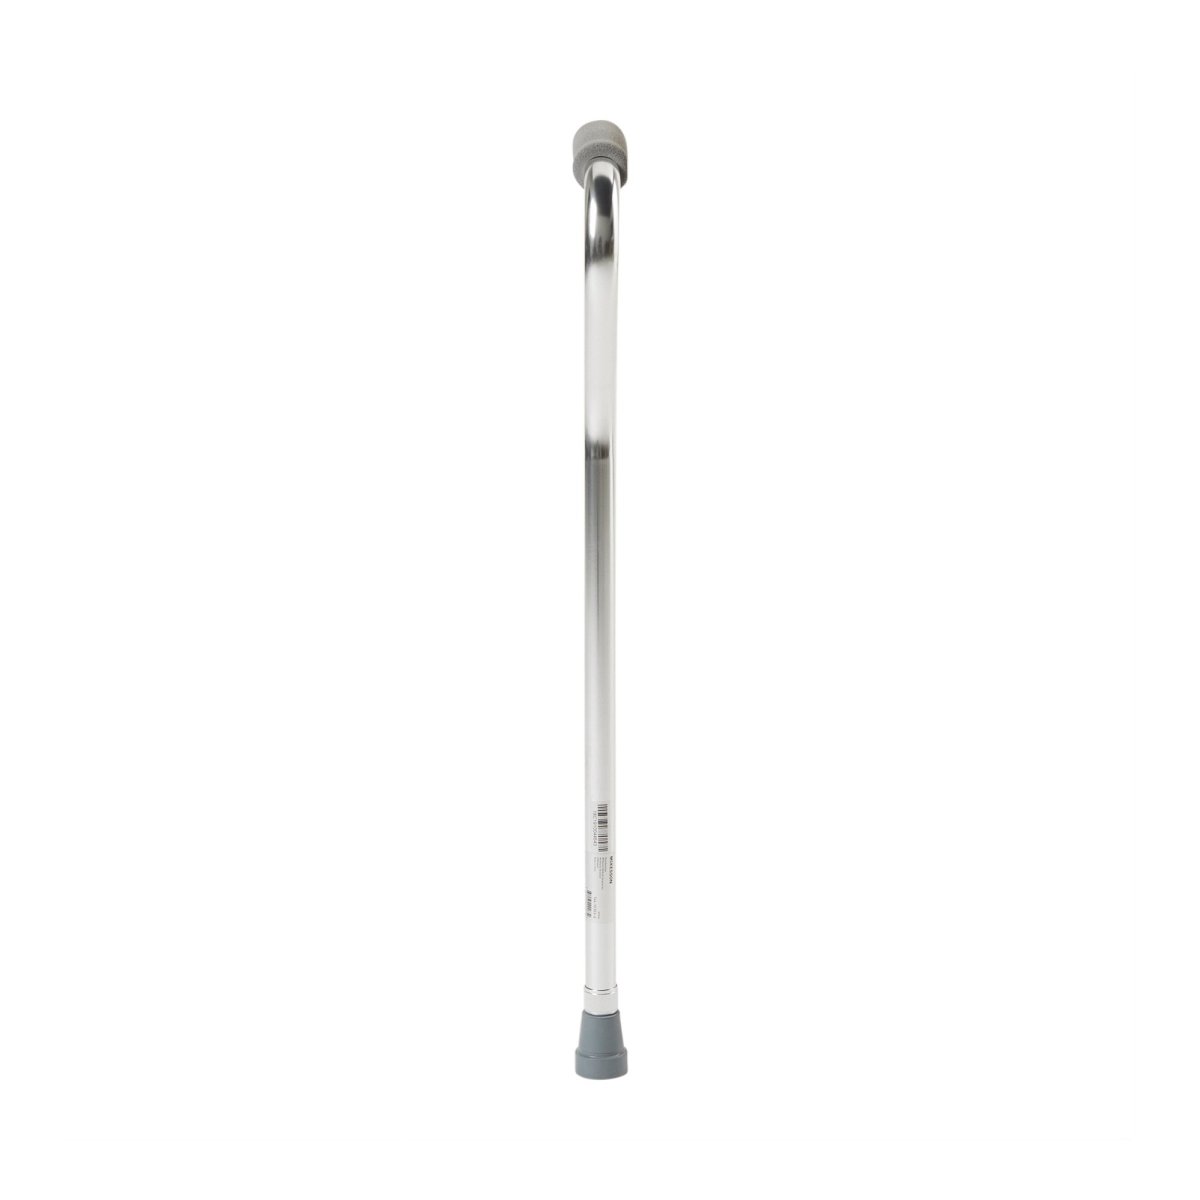 McKesson Aluminum Silver Offset Cane, 30 – 39 Inch Height - 1065215_EA - 1